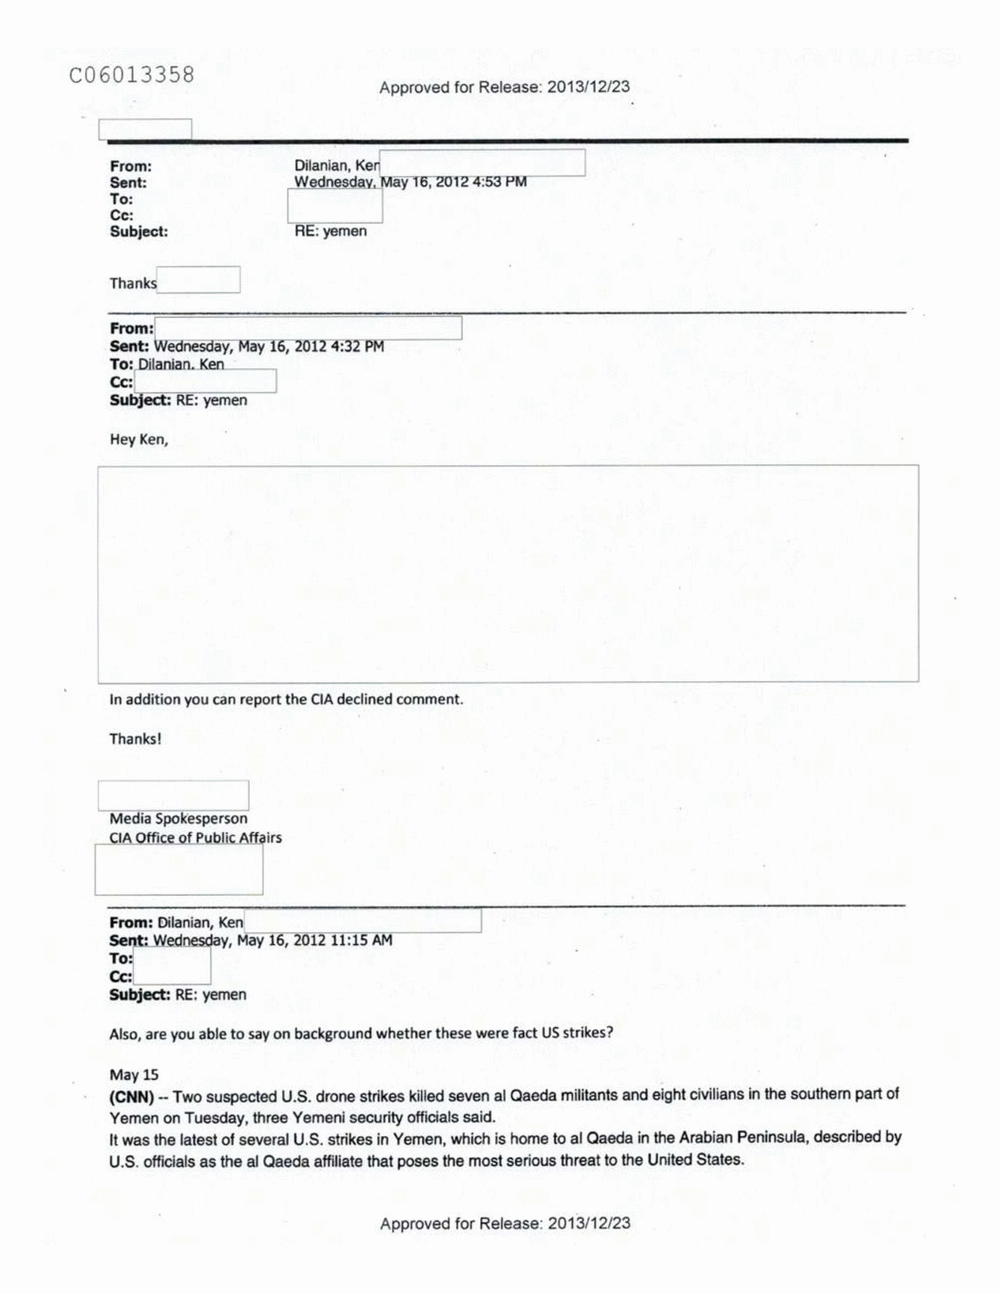 Page 280 from Email Correspondence Between Reporters and CIA Flacks